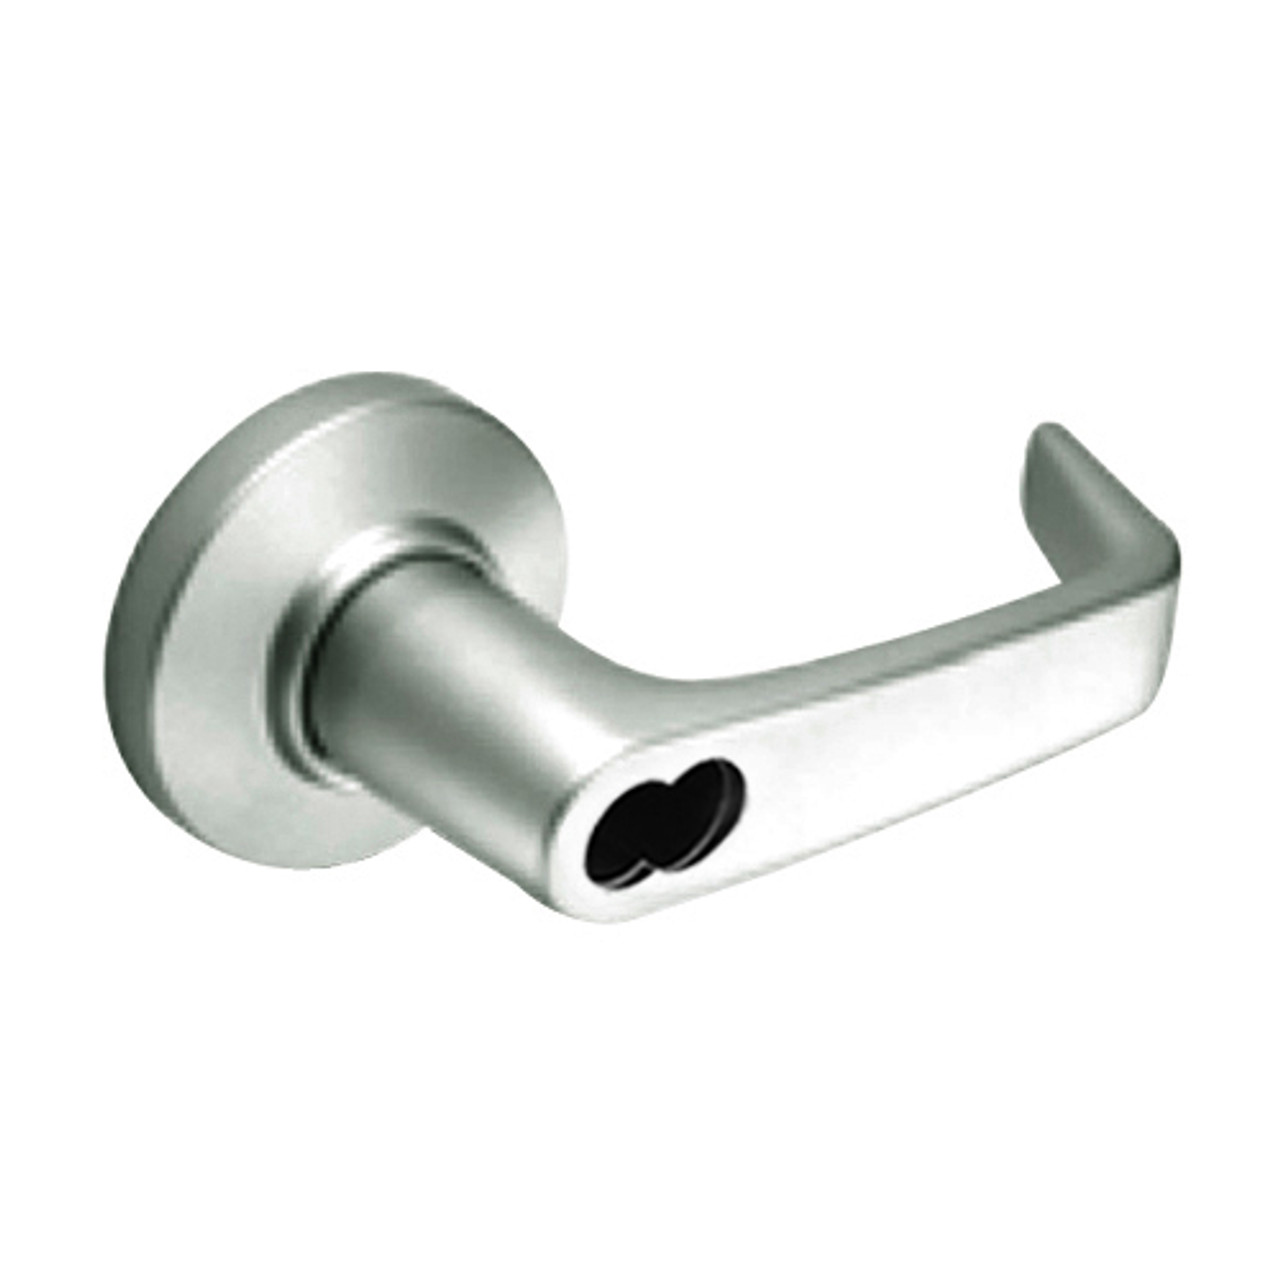 9K47E15CS3619 Best 9K Series Service Station Cylindrical Lever Locks with Contour Angle with Return Lever Design Accept 7 Pin Best Core in Satin Nickel